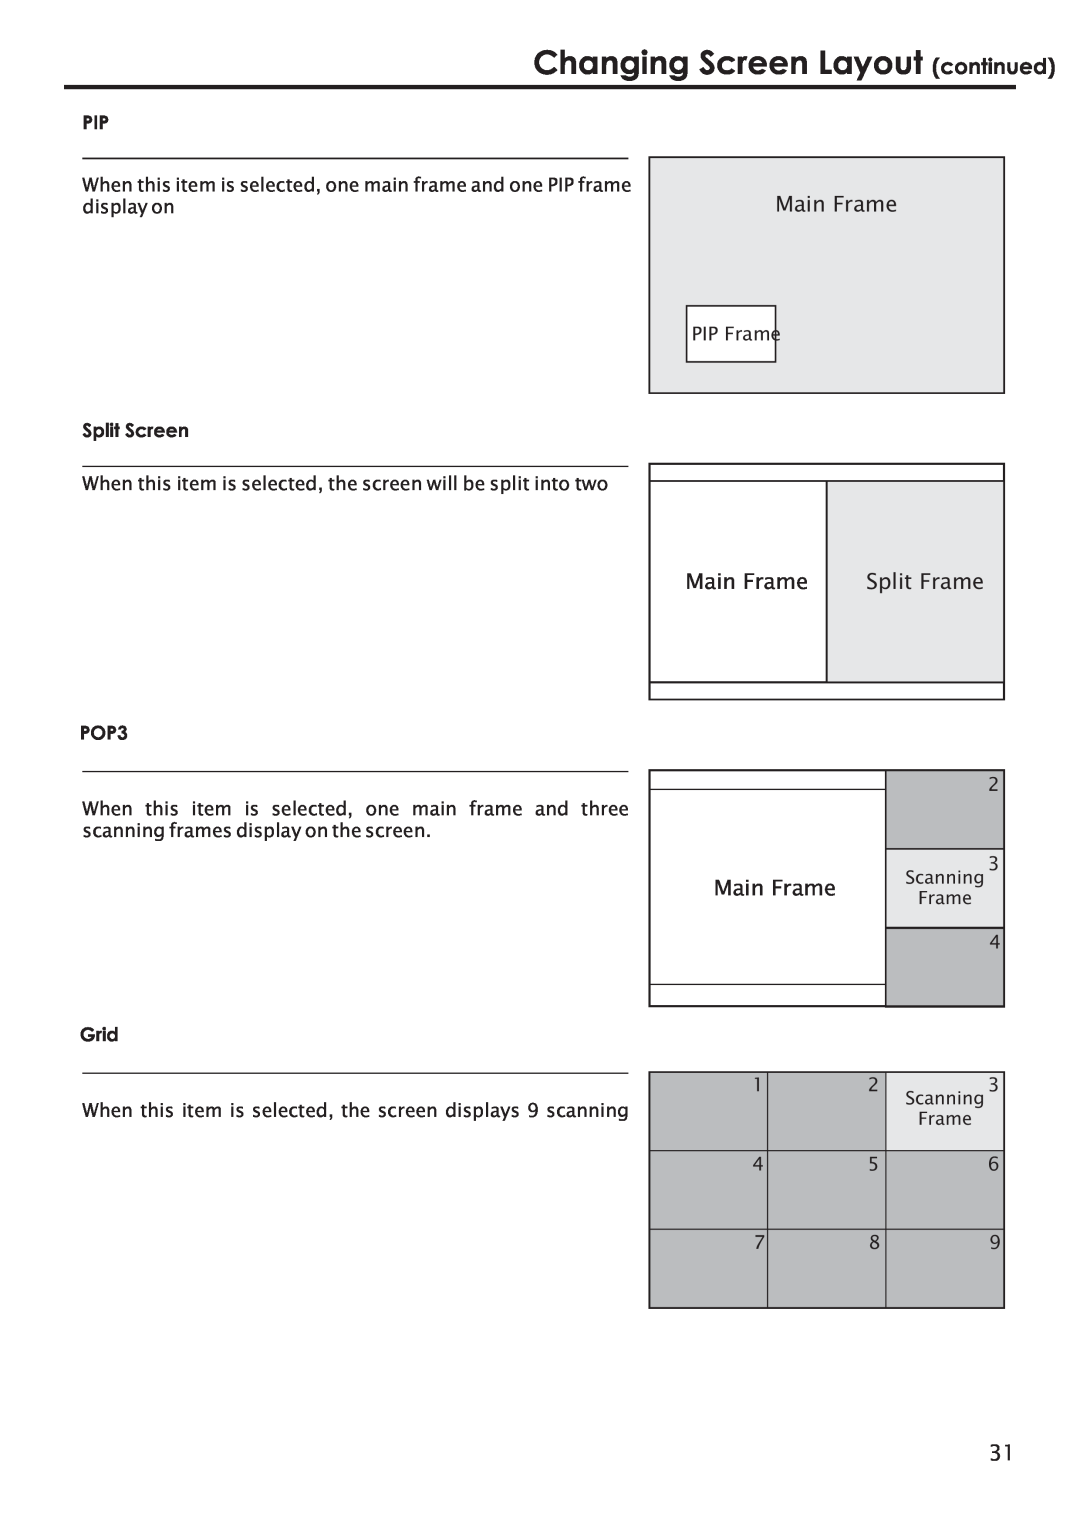 Primate Systems PDP TV manual Changing Screen Layout continued, Split Screen, POP3, Grid 